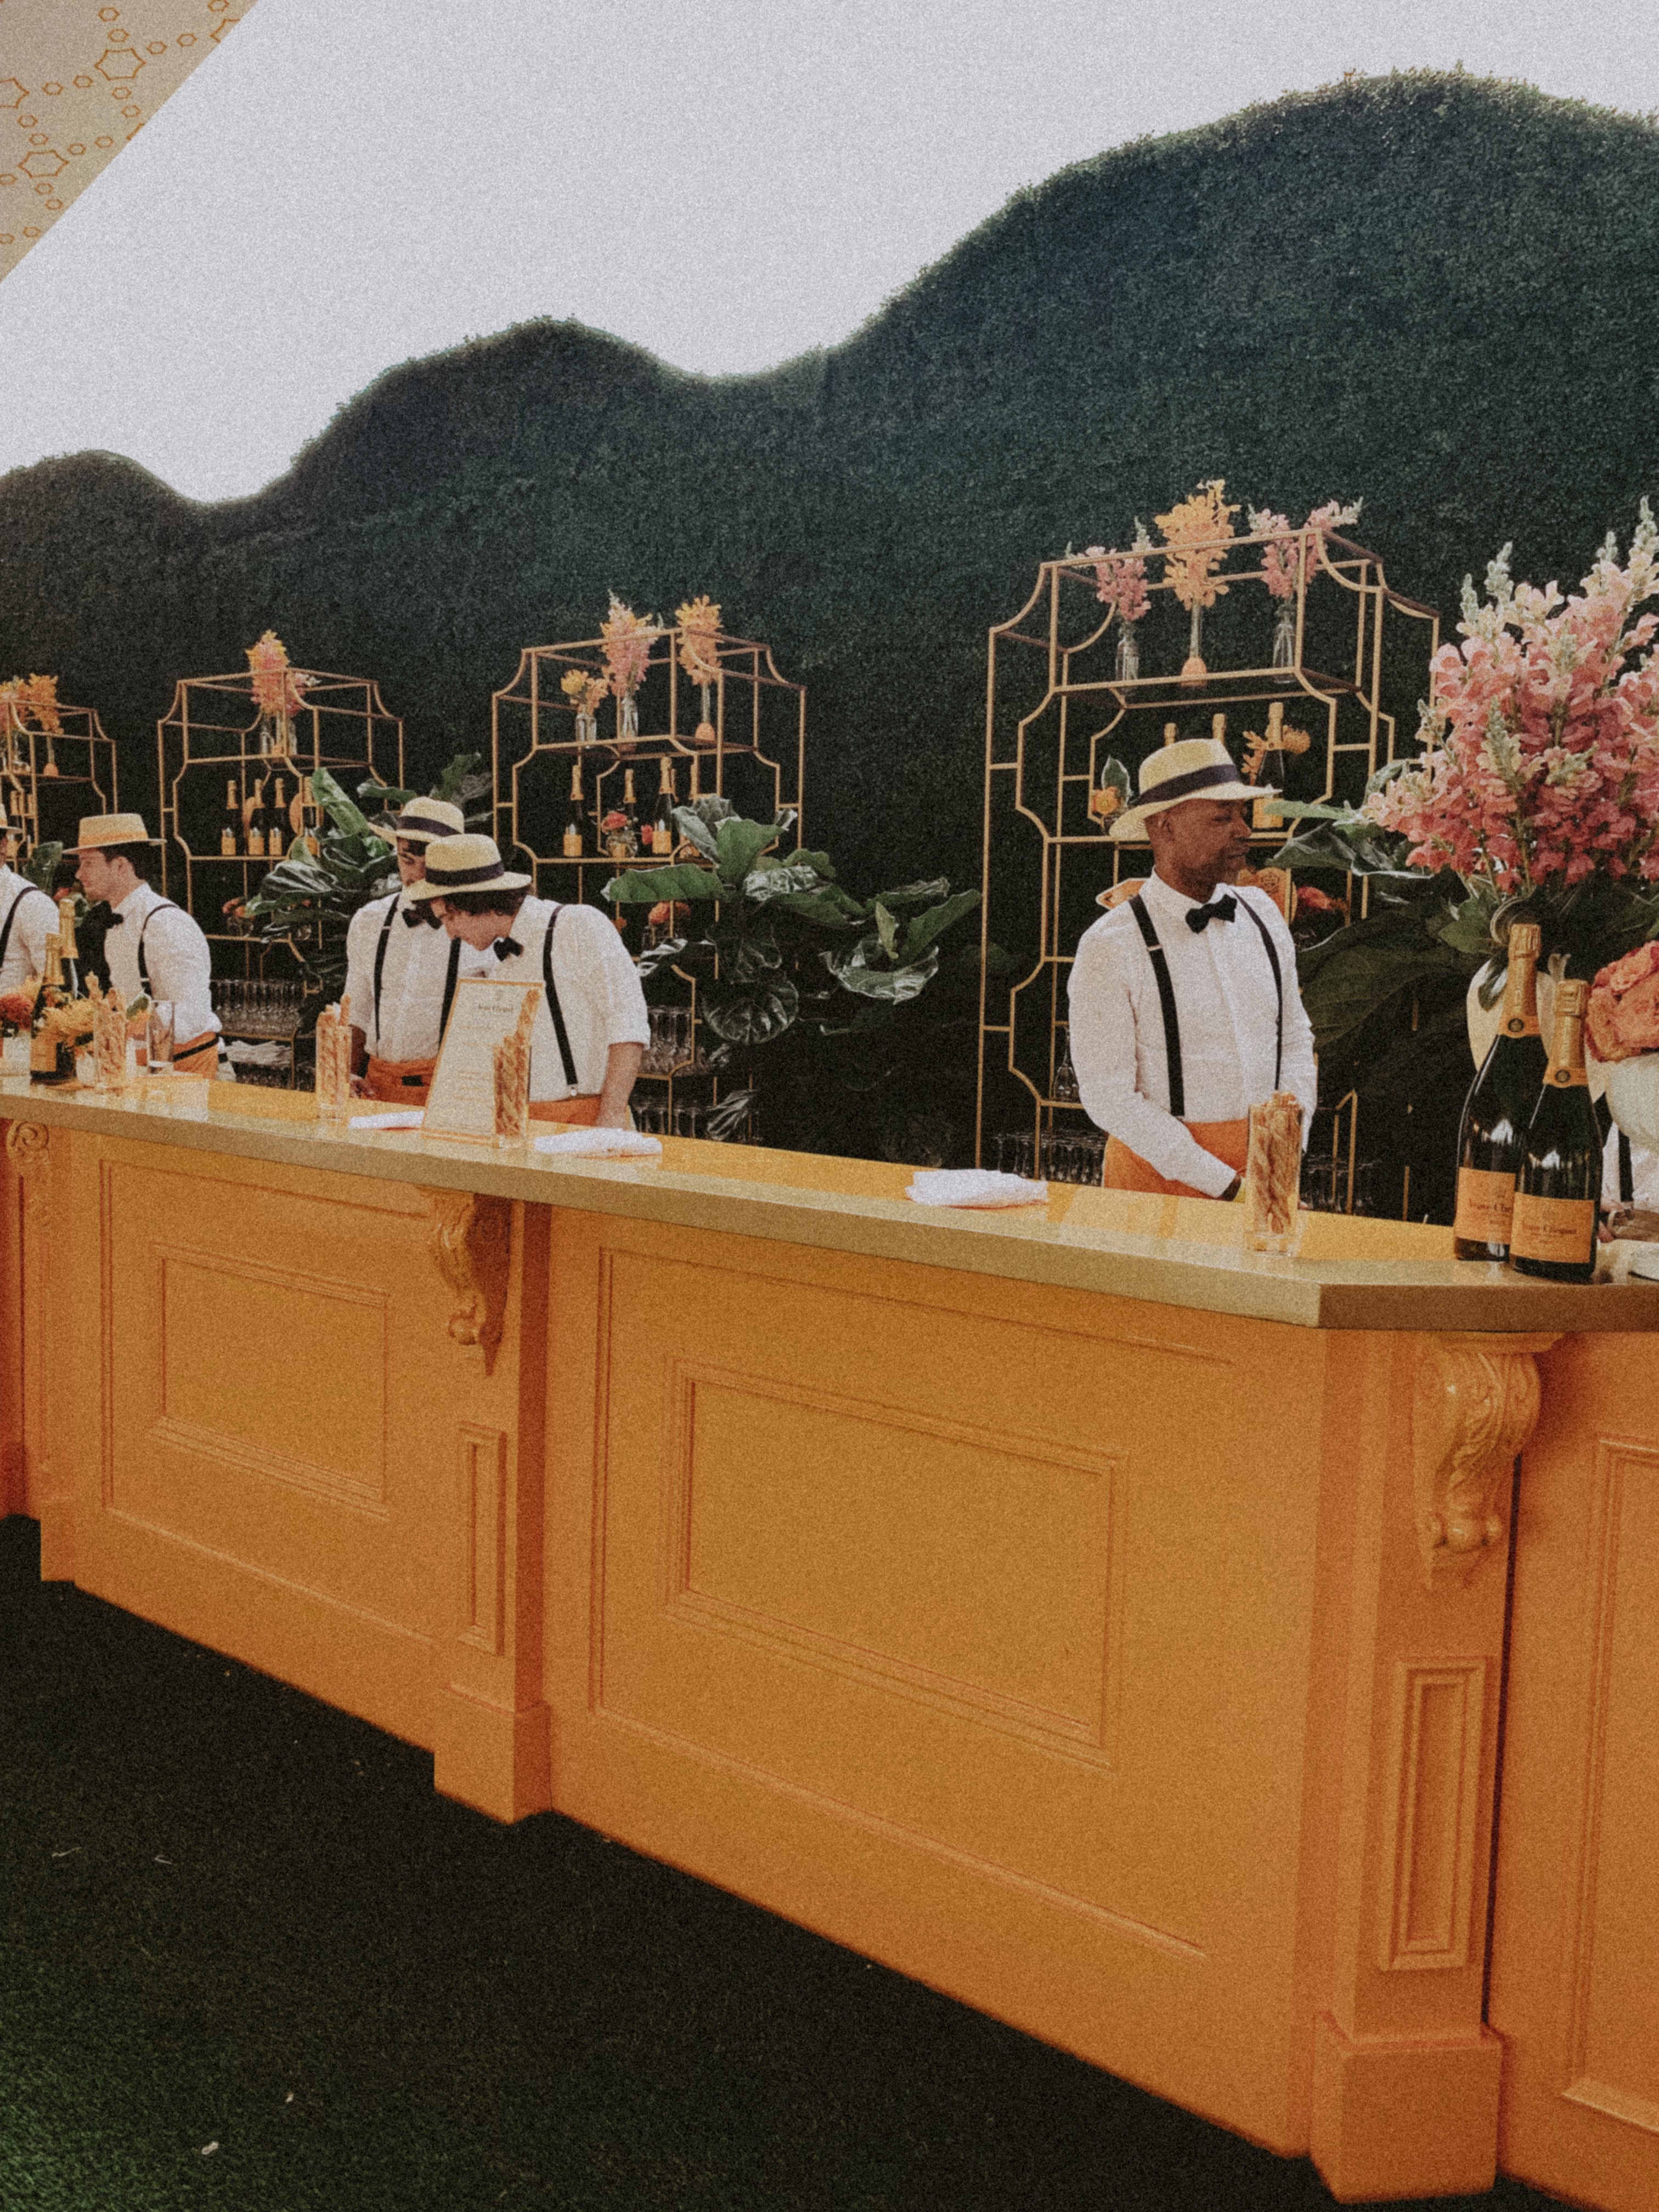 The Veuve Clicquot Polo Classic-VCPC-NYC-Liberty State Park-Events-DVF-Style-Outfit-Westchester Blogger #vcstyle #VeuveClicquot #vcpc #nyc #events #food #summer VIP Tent